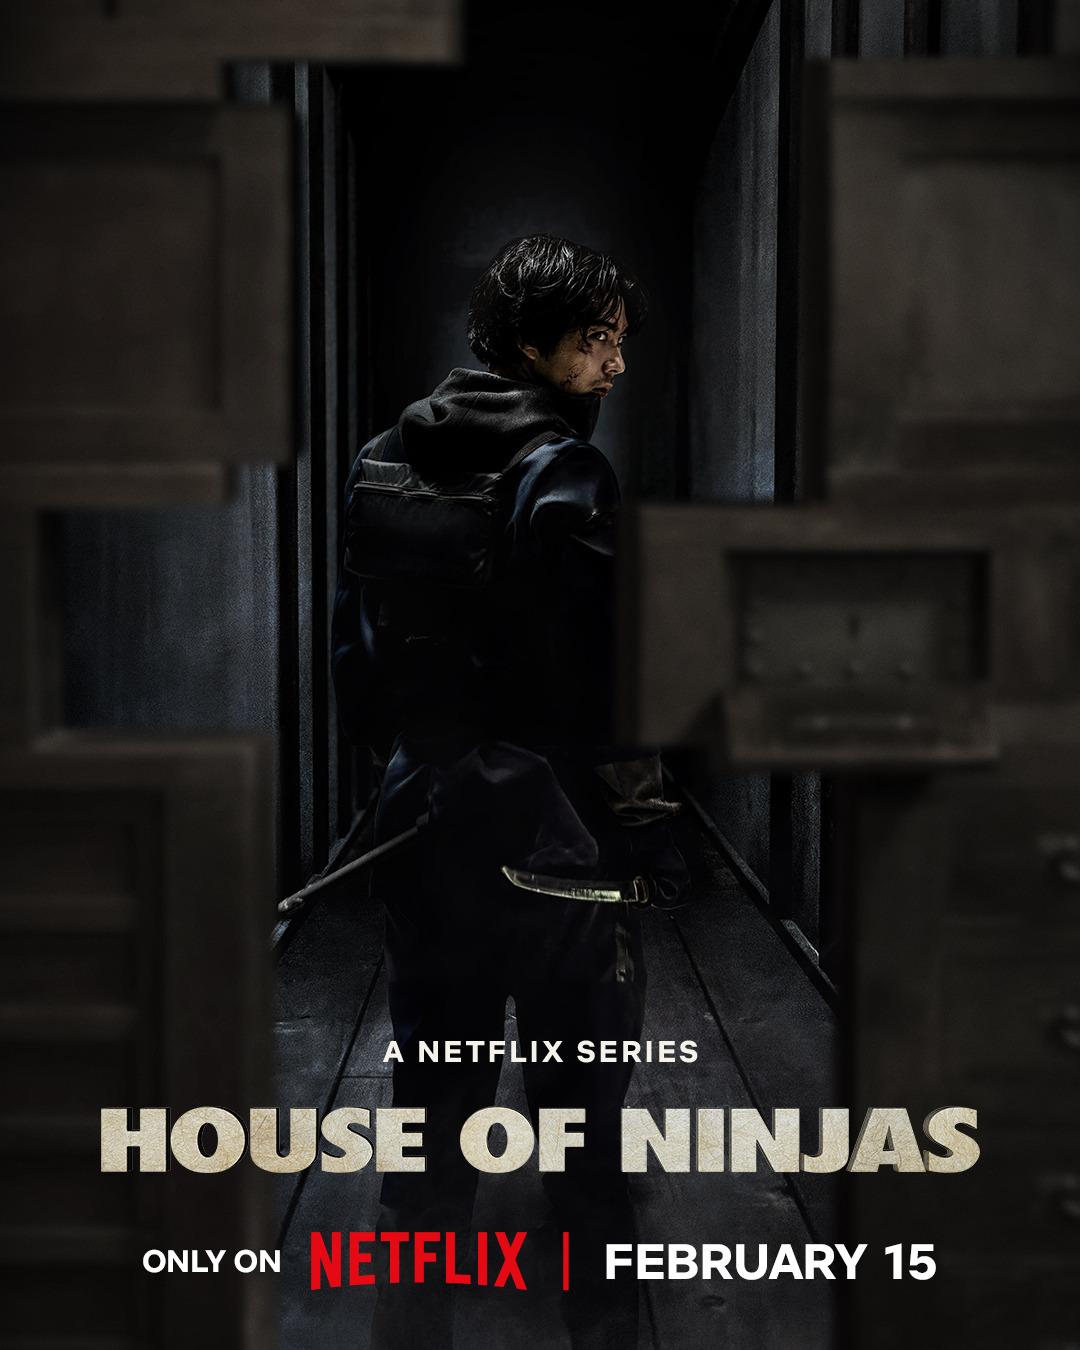 House of Ninjas (February 15) - Streaming on NetflixHouse of Ninjas is a Japanese drama that zeroes in on the Tawara family, the last surviving ninja clan. After leaving behind their roots due to a past incident, this dysfunctional family must return to shadowy missions and confront the greatest crisis in Japanese history threatening to destabilise the nation.